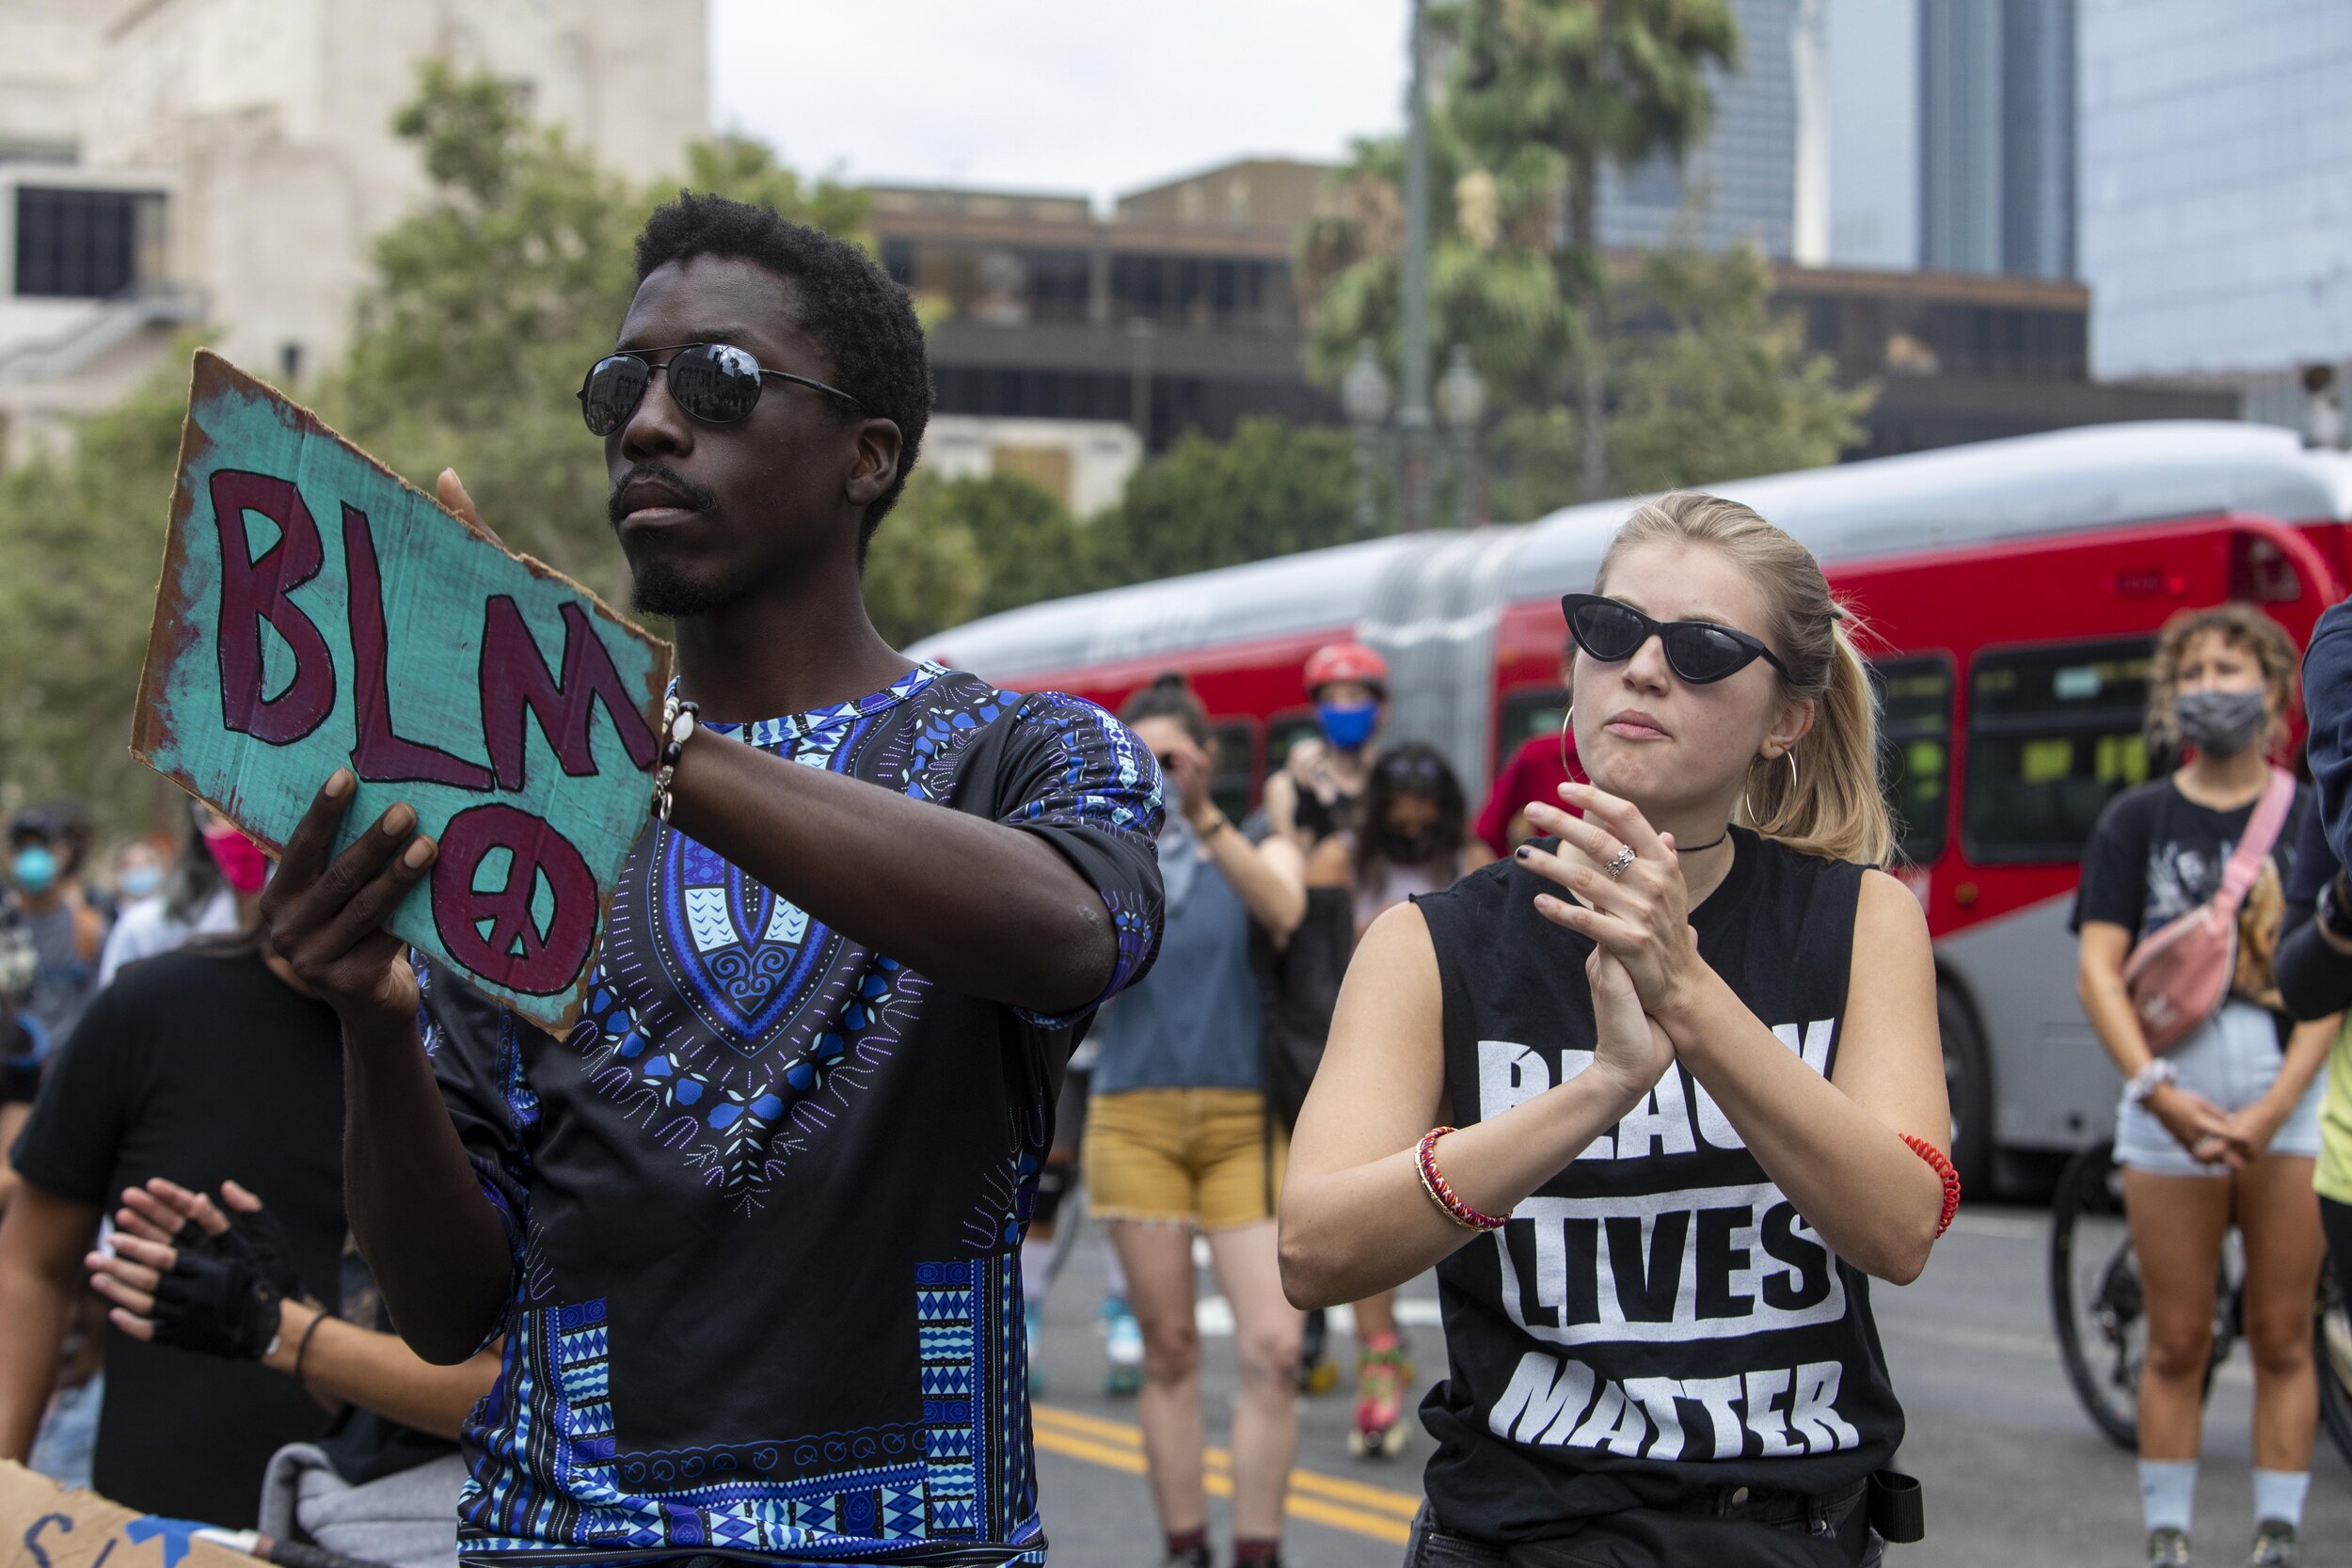  Wendell Phipes (left)and Tricia Plinzke clap as they listen to a speaker in front of City Hall at the Rise &amp; Skate all wheels welcome protest in celebration of Juneteenth and in solidarity with Black Lives Matter in Los Angeles.  